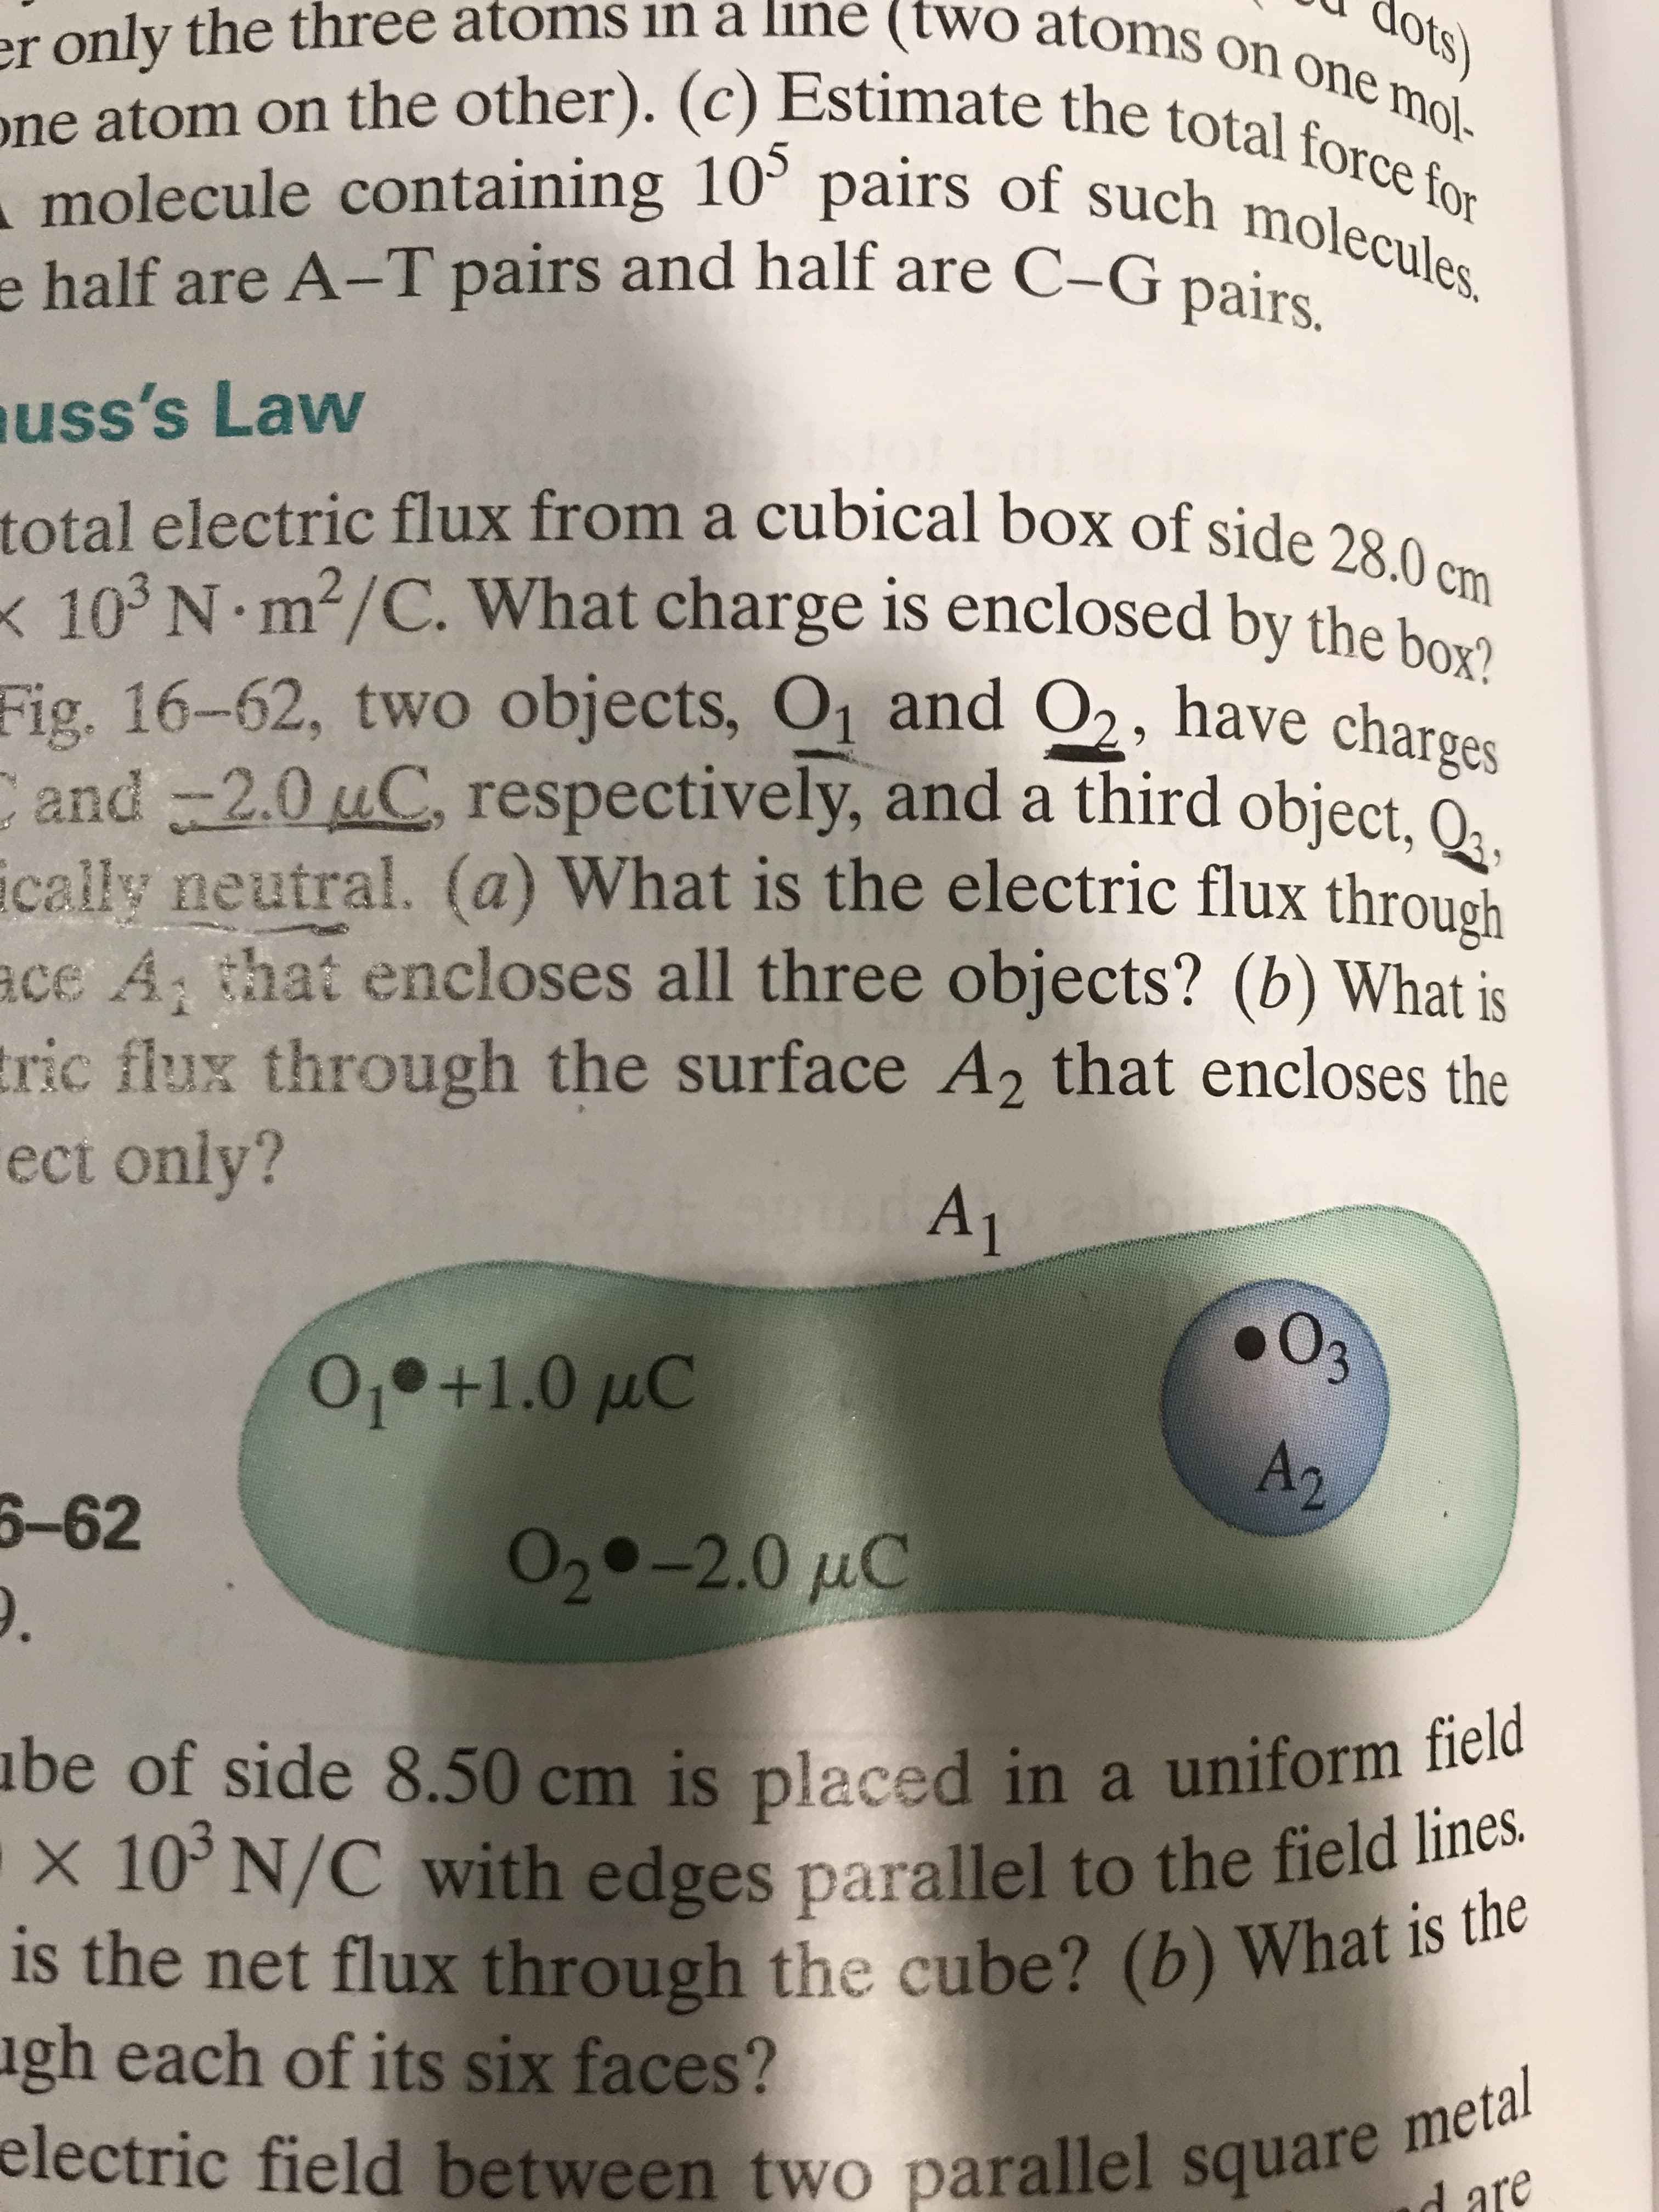 er only the three atoms in a line (two atoms on one mol-
dots)
one atom on the other). (c) Estimate the total force for
- molecule containing 10° pairs of such molecules.
105
molecule containing
e half are A-T pairs and half are C-G pairs.
uss's Law
total electric flux from a cubical box of side 28.0 cm
< 103 N m?/C. What charge is enclosed by the bowo
Fig. 16-62, two objects, O1 and O2, have charges
Cand -2.0 uC, respectively, and a third object, O,
ically neutral. (a) What is the electric flux through
ace A that encloses all three objects? (b) What is
tric flux through the surface A2 that encloses the
ect only?
Oз
0,•+1.0 µC
A2
6-62
020-2.0 µC
abe of side 8.50 cm is placed in a uniform field
-x 10° N/C with edges parallel to the field lines.
is the net flux through the cube? (b) What is the
ugh each of its six faces?
electric field between two parallel square metal
d are
